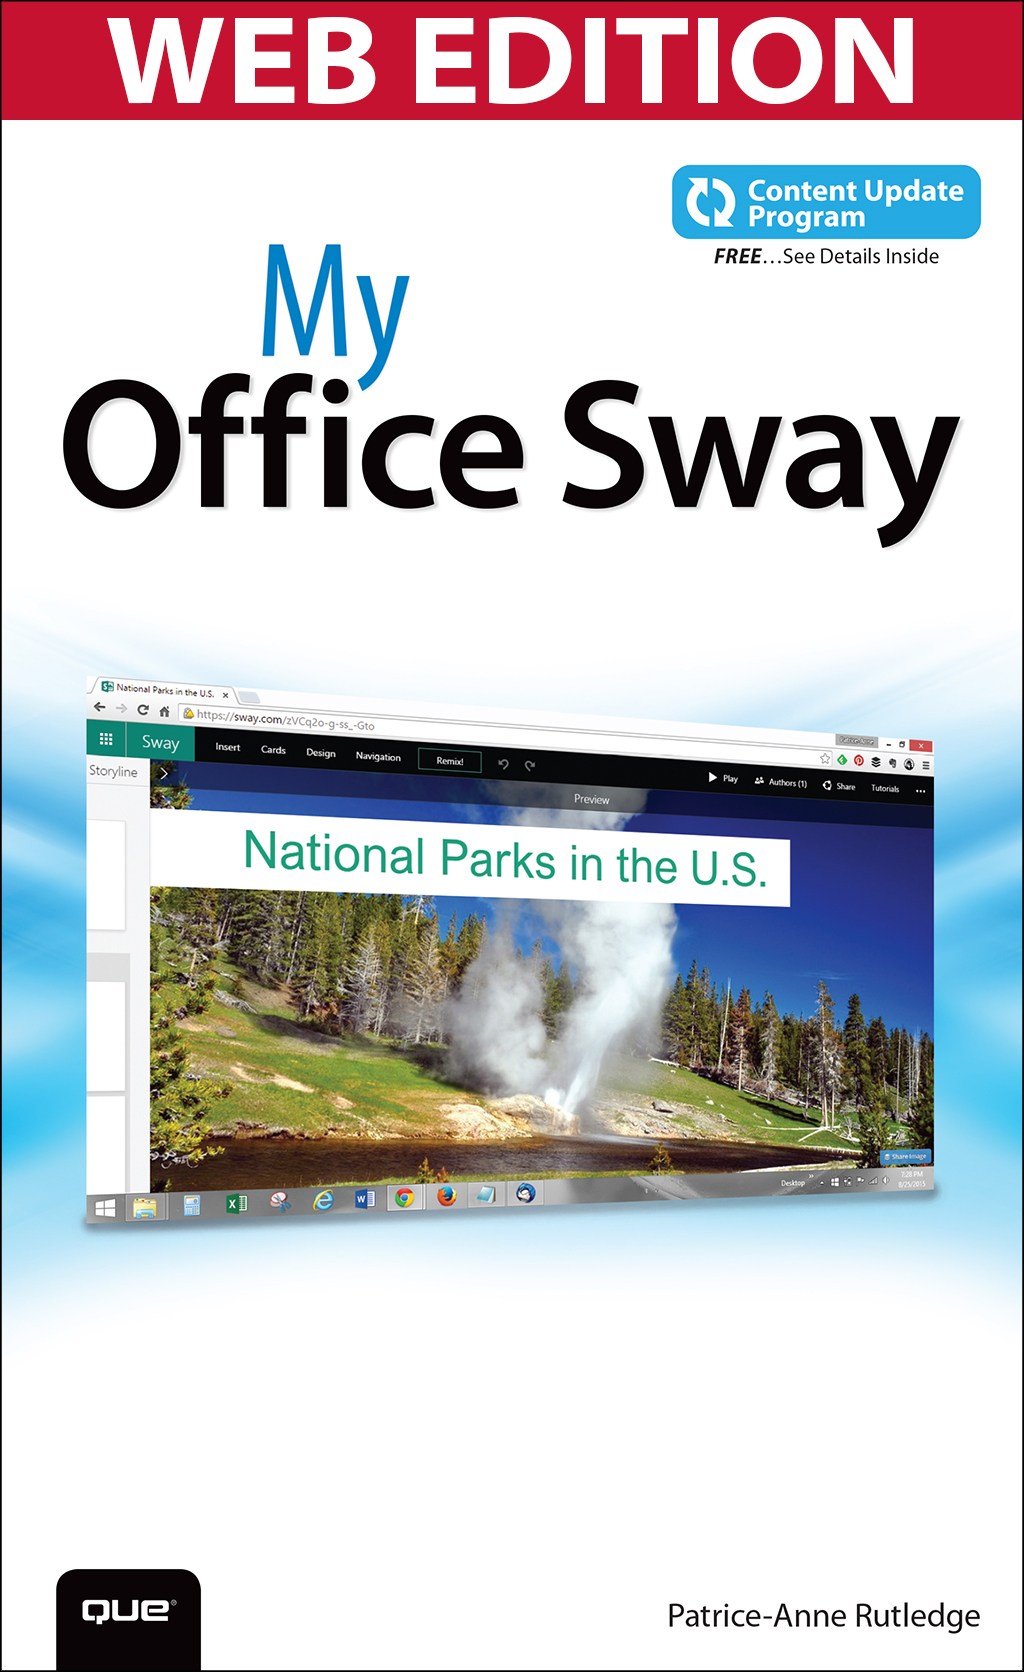 My Office Sway (Web Edition with Content Update Program)